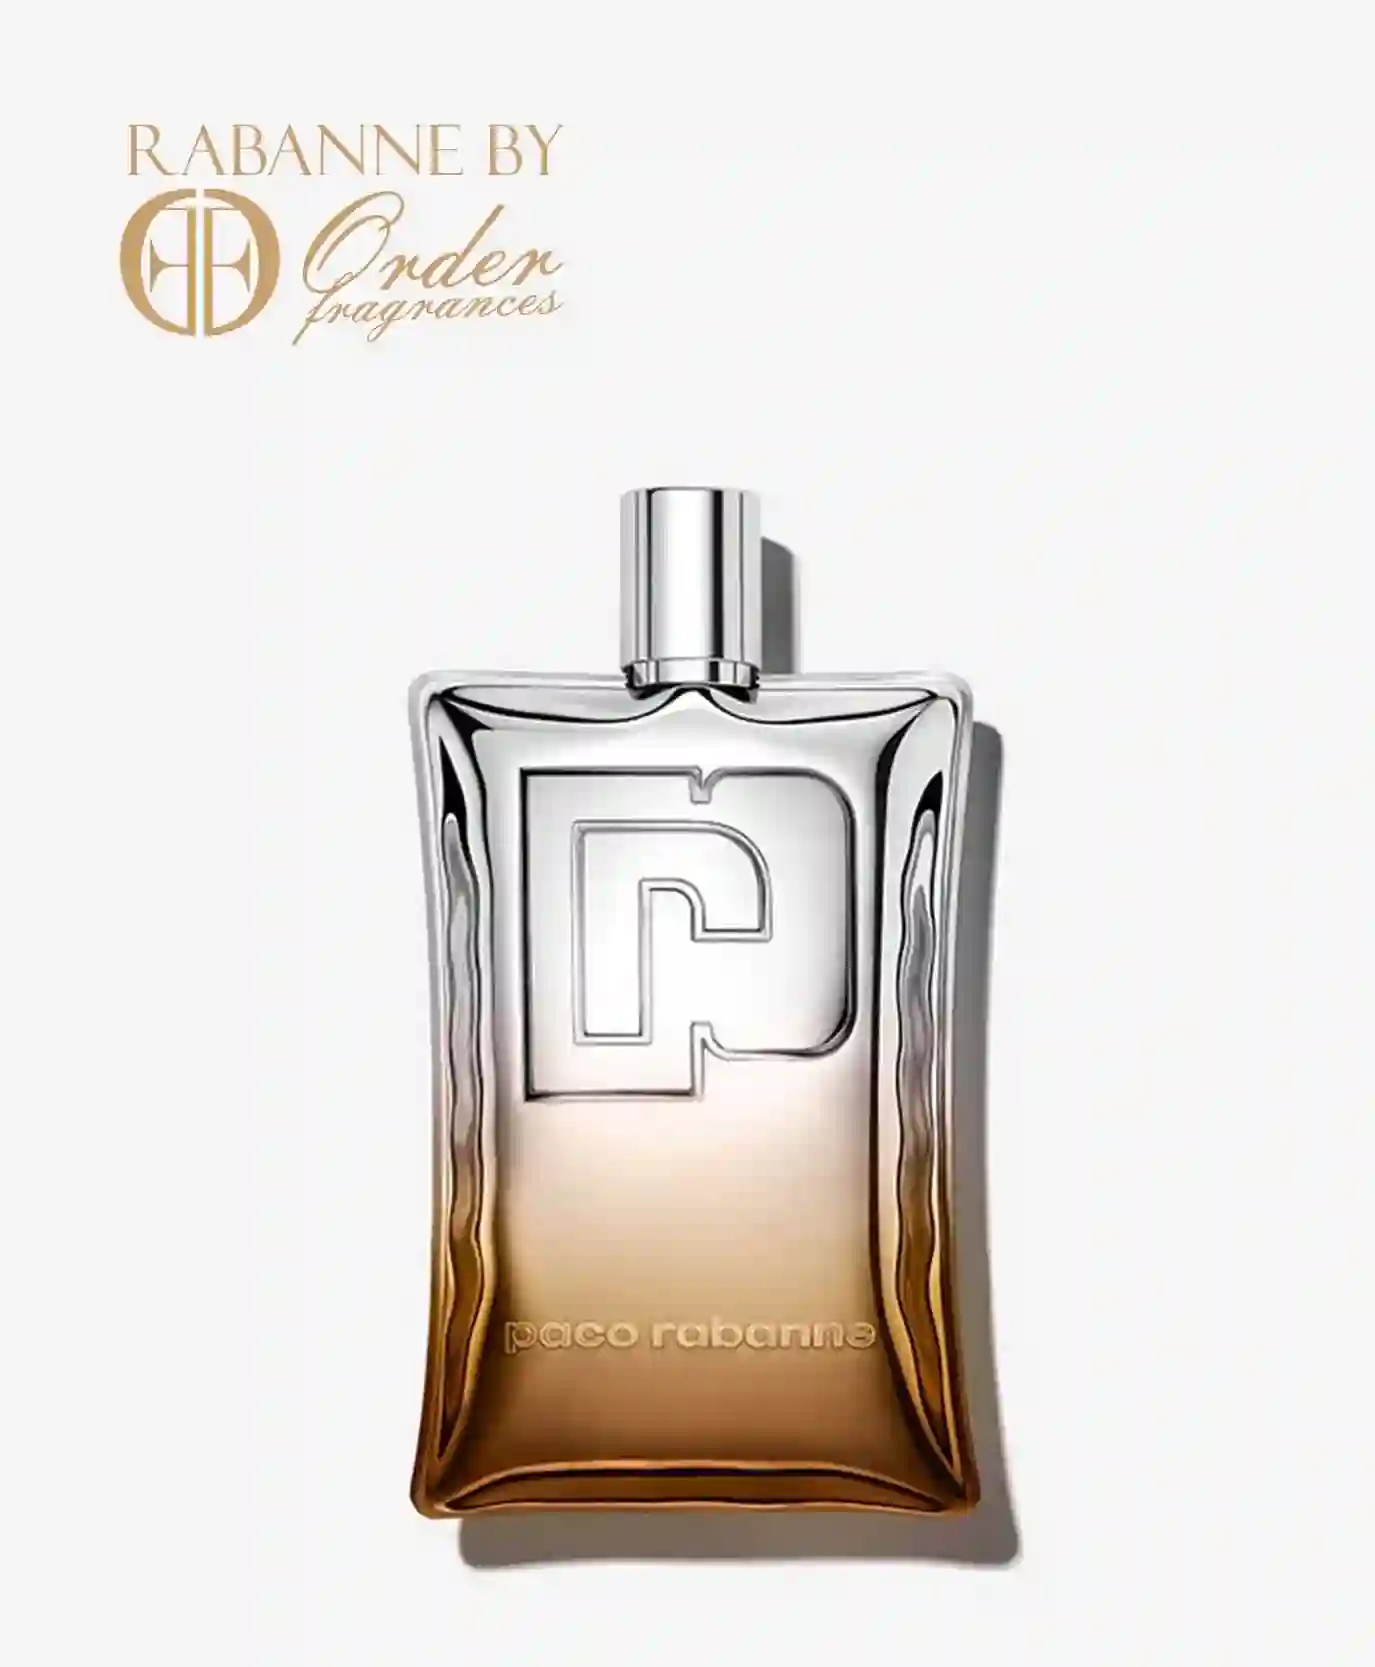 Dandy Me Paco Rabanne for women and men